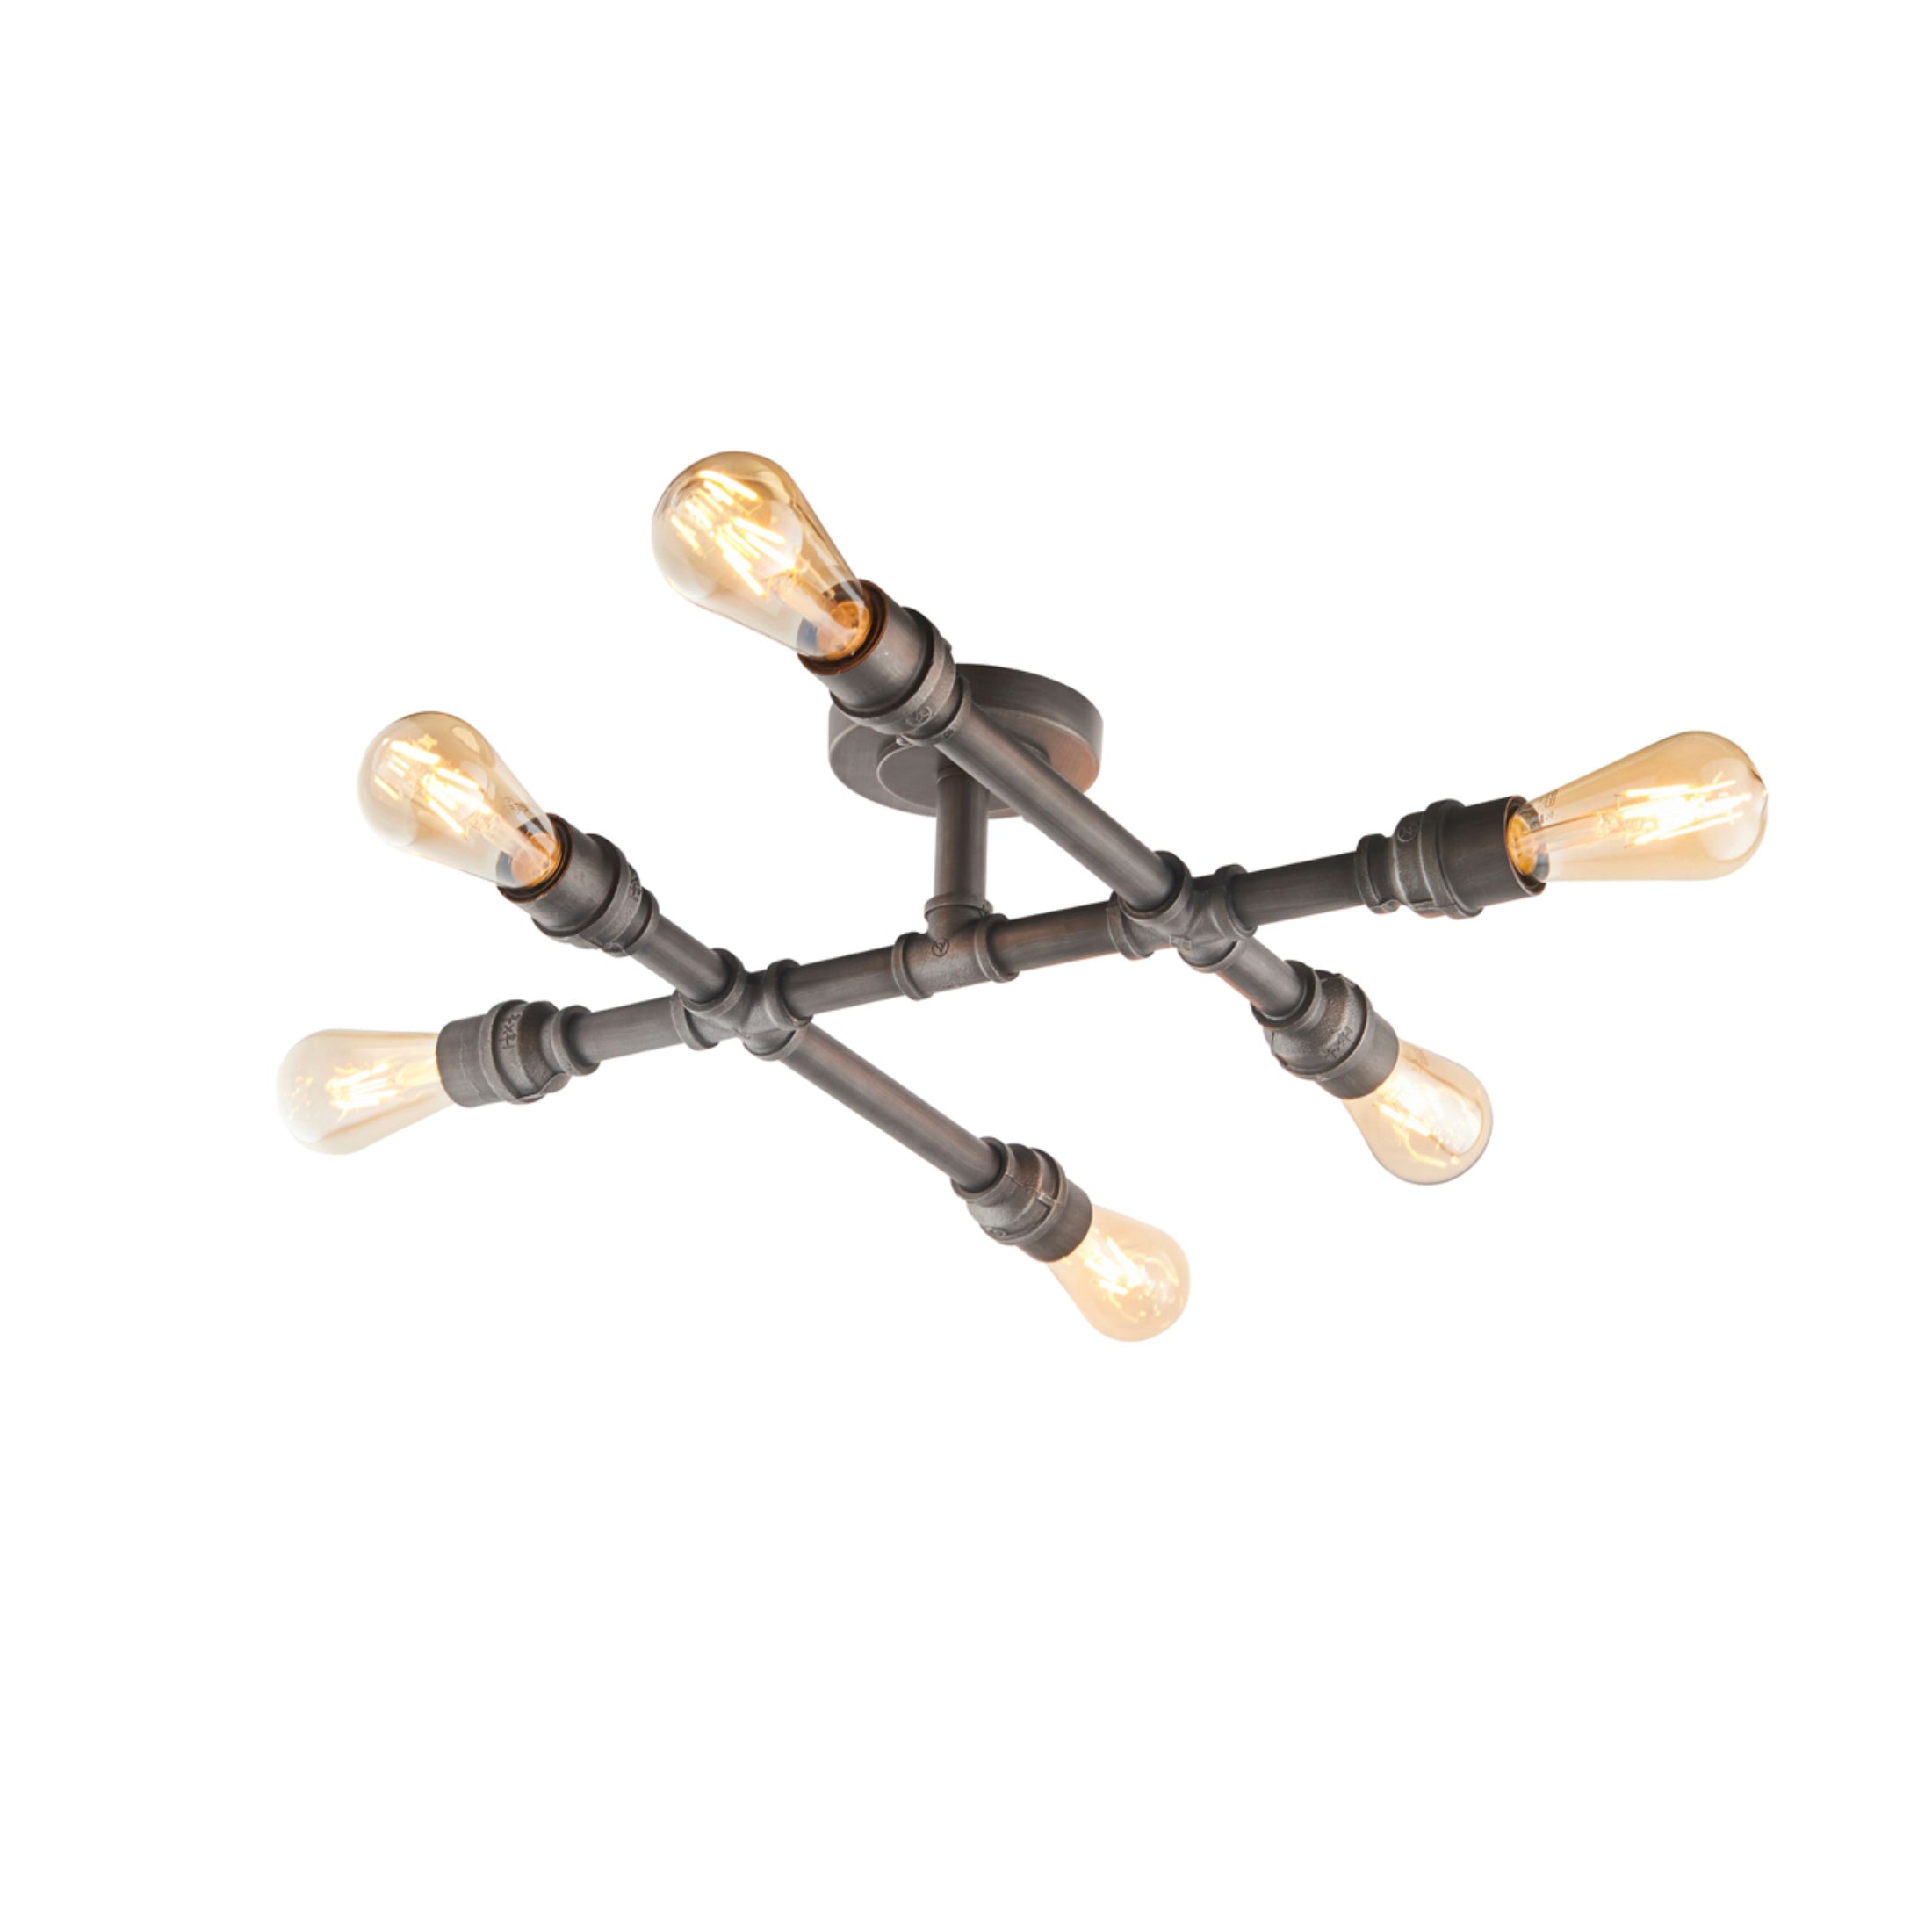 Industrial Pipe Ceiling Light 5